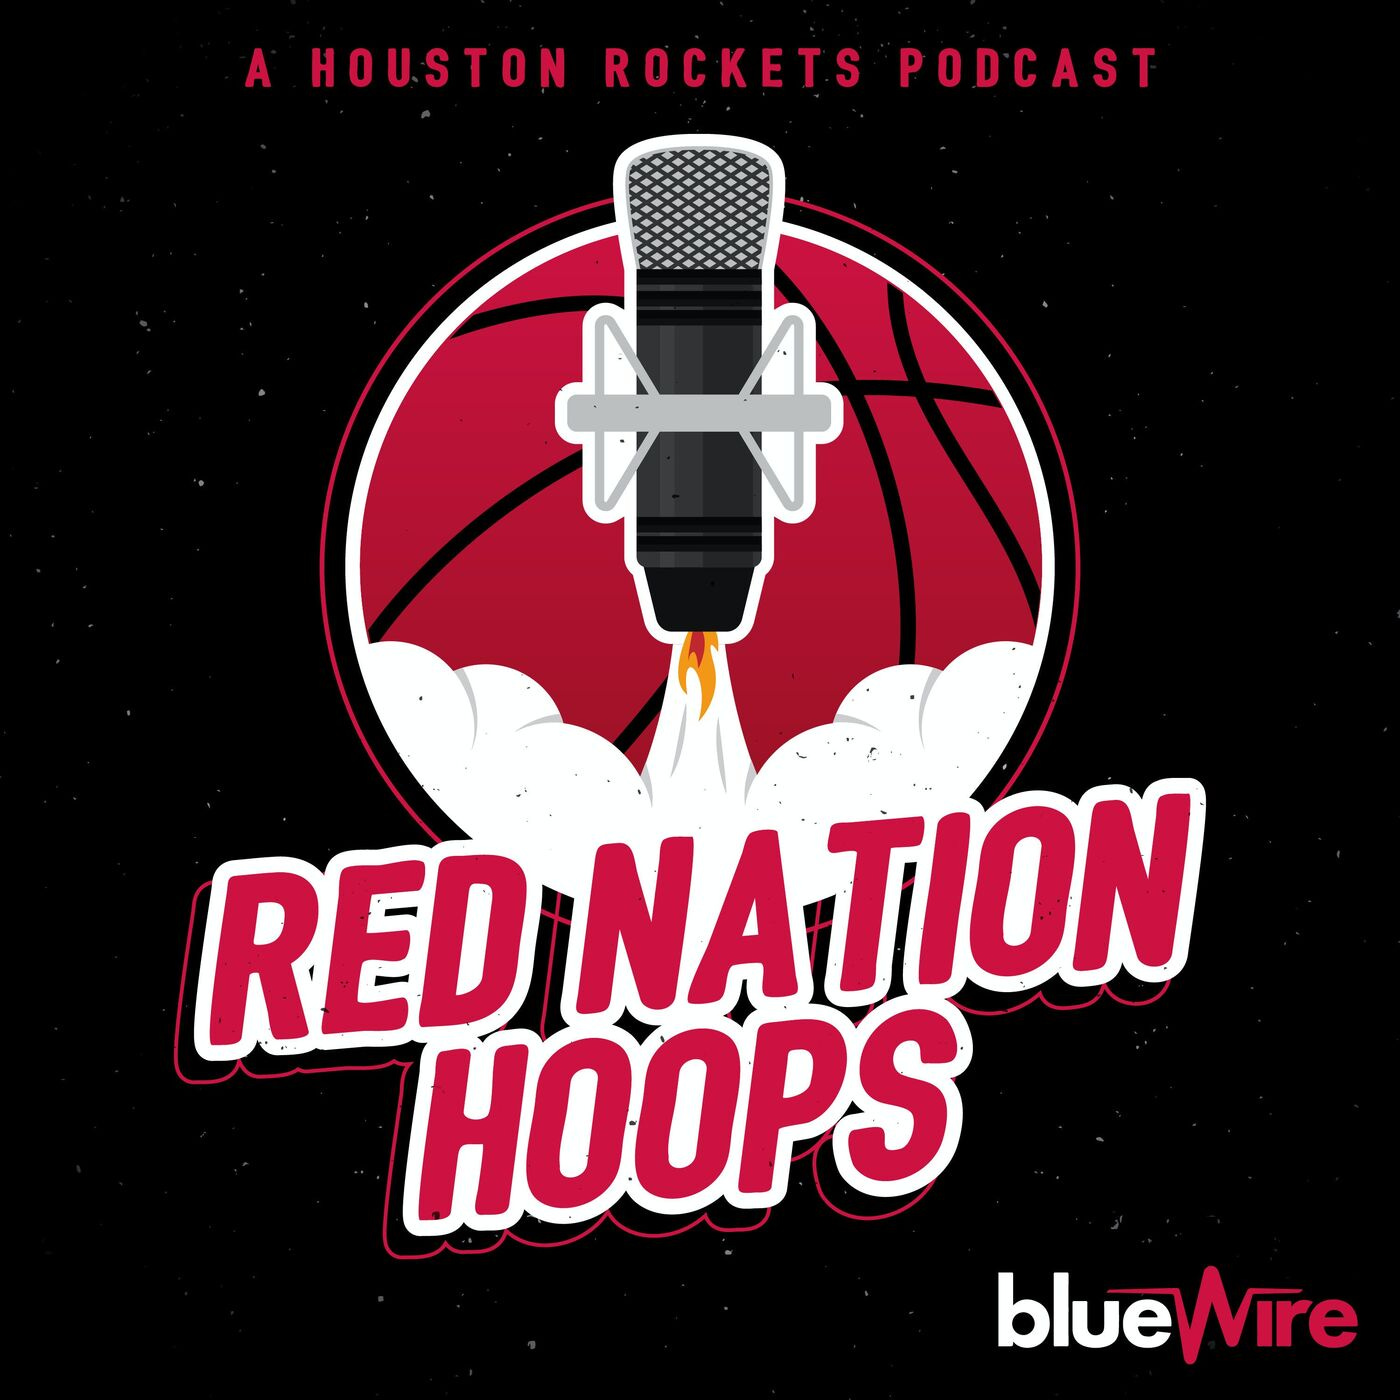 Ep. 134: Eric Gordon returns, Isaiah Hartenstein earns rotation spot, and Rockets' New Year's Resolutions